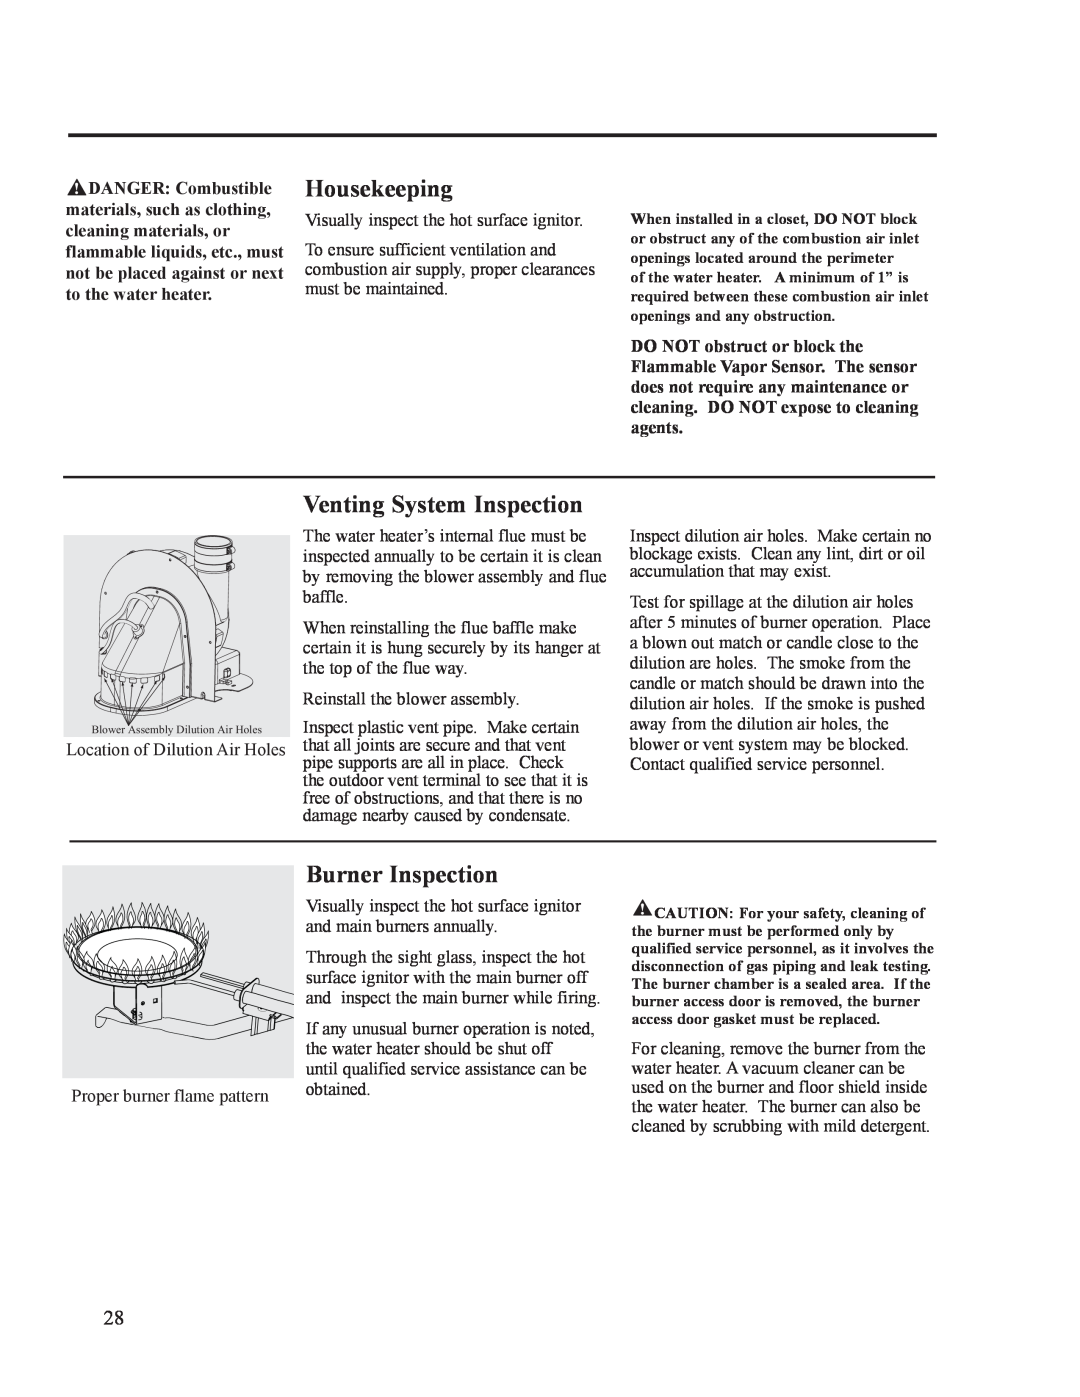 Ruud AP14236 installation instructions Housekeeping, Venting System Inspection, Burner Inspection 